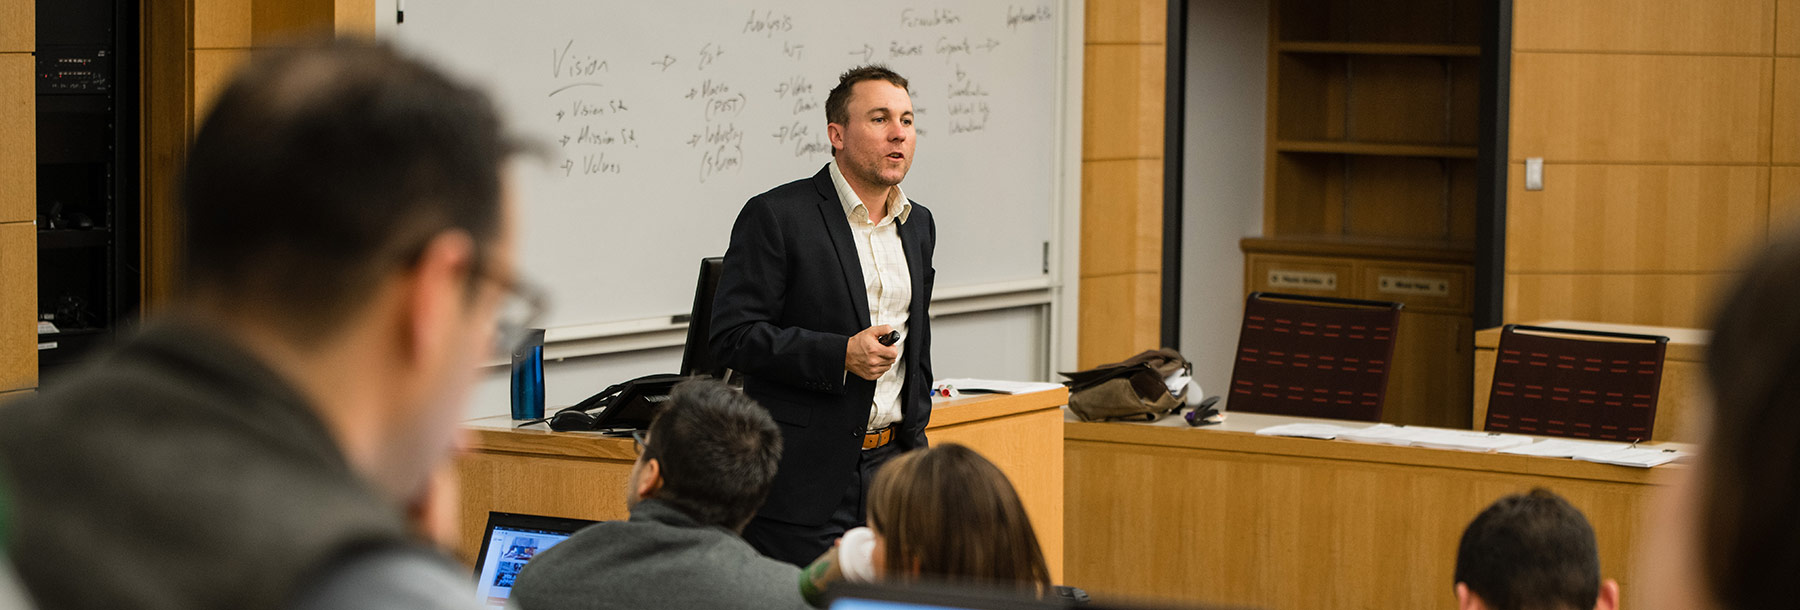 A professor speaks in front of a classroom.